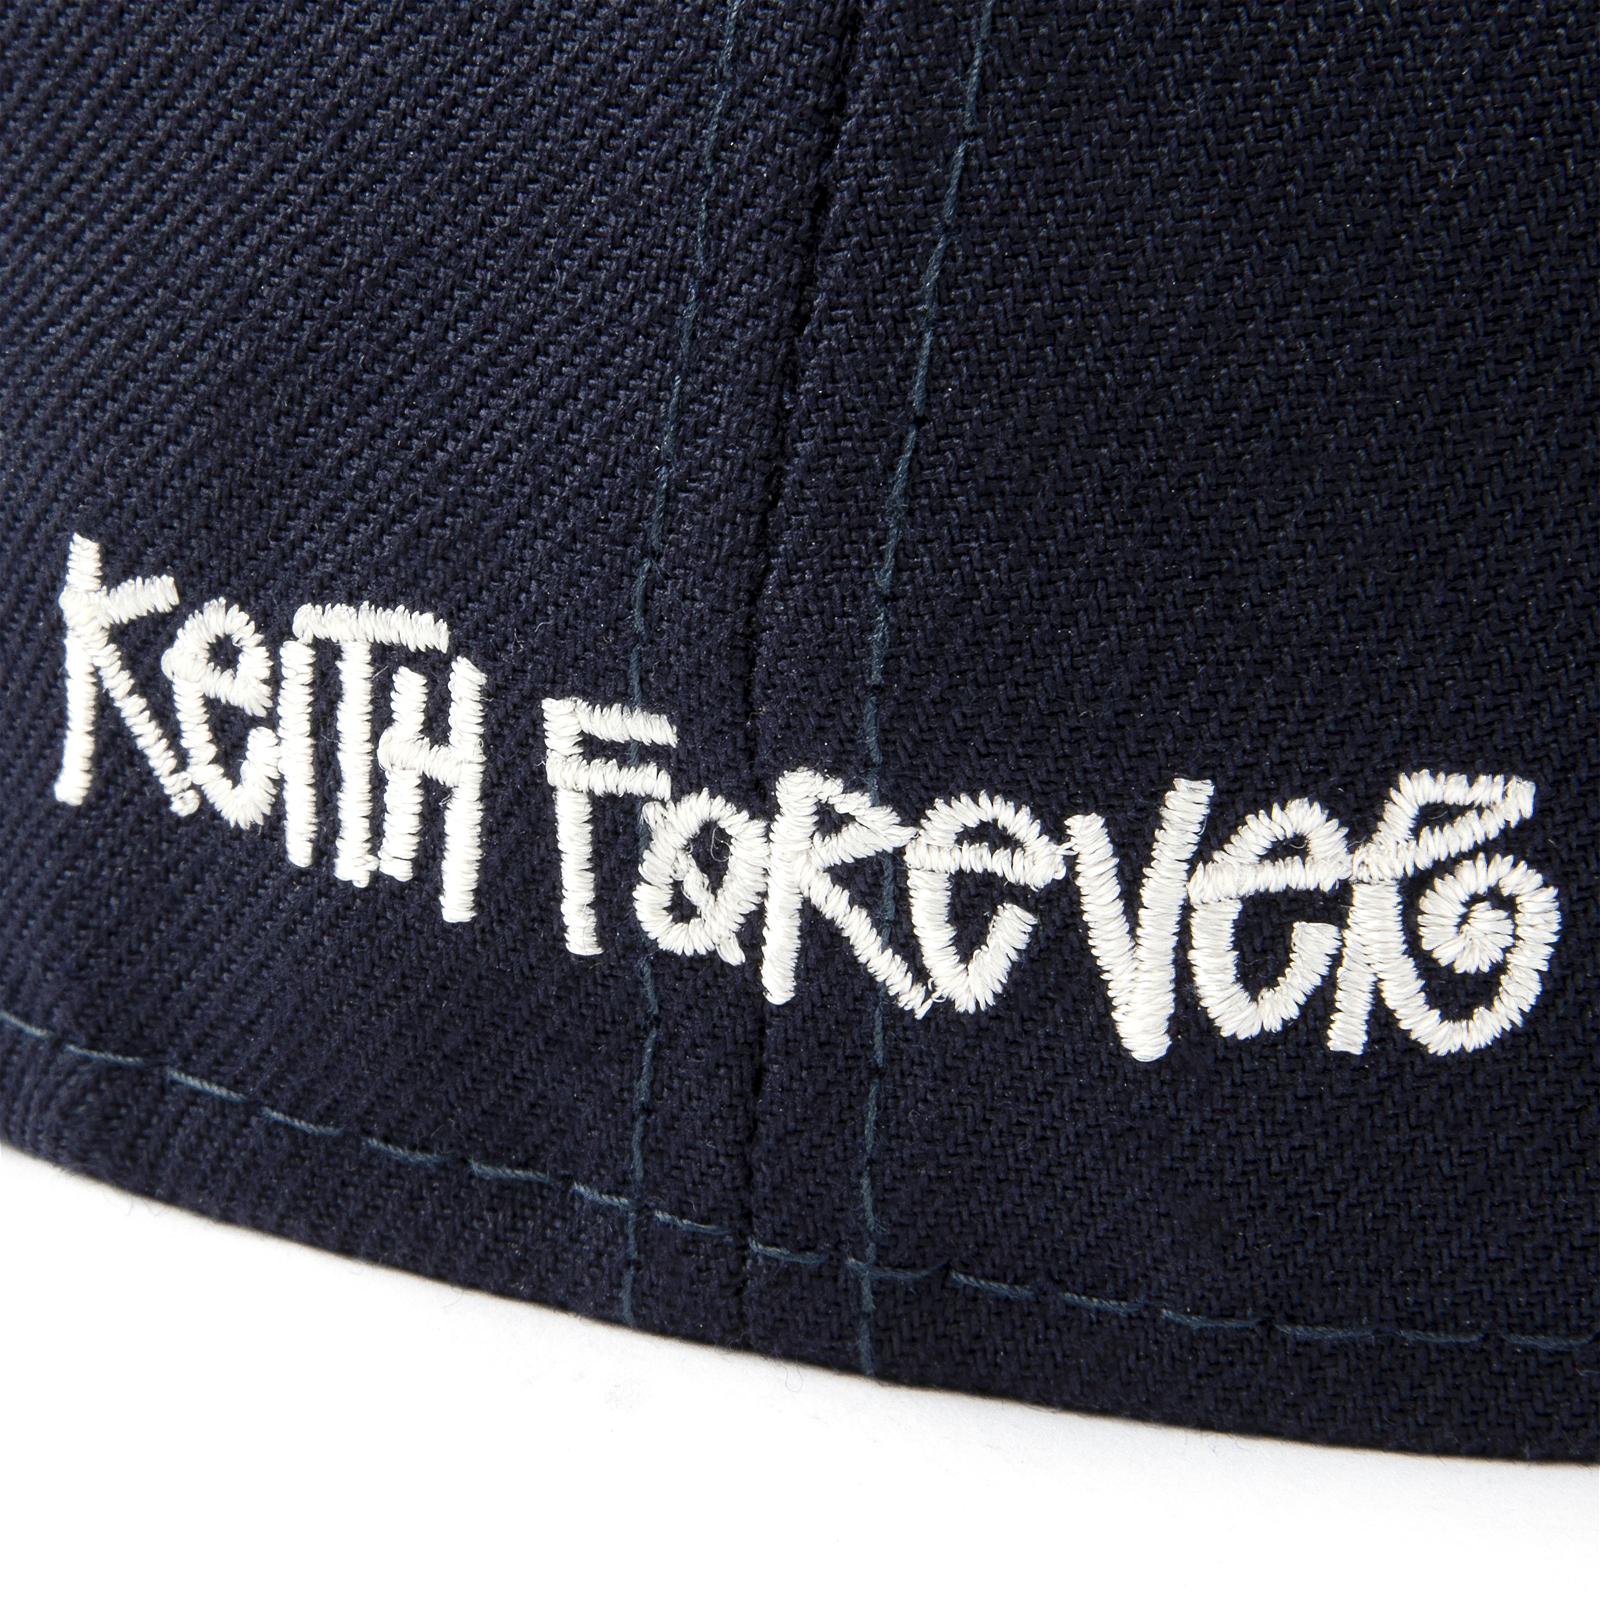 HUF & Stüssy Honor Keith Hufnagel's Legacy With Capsule Collection